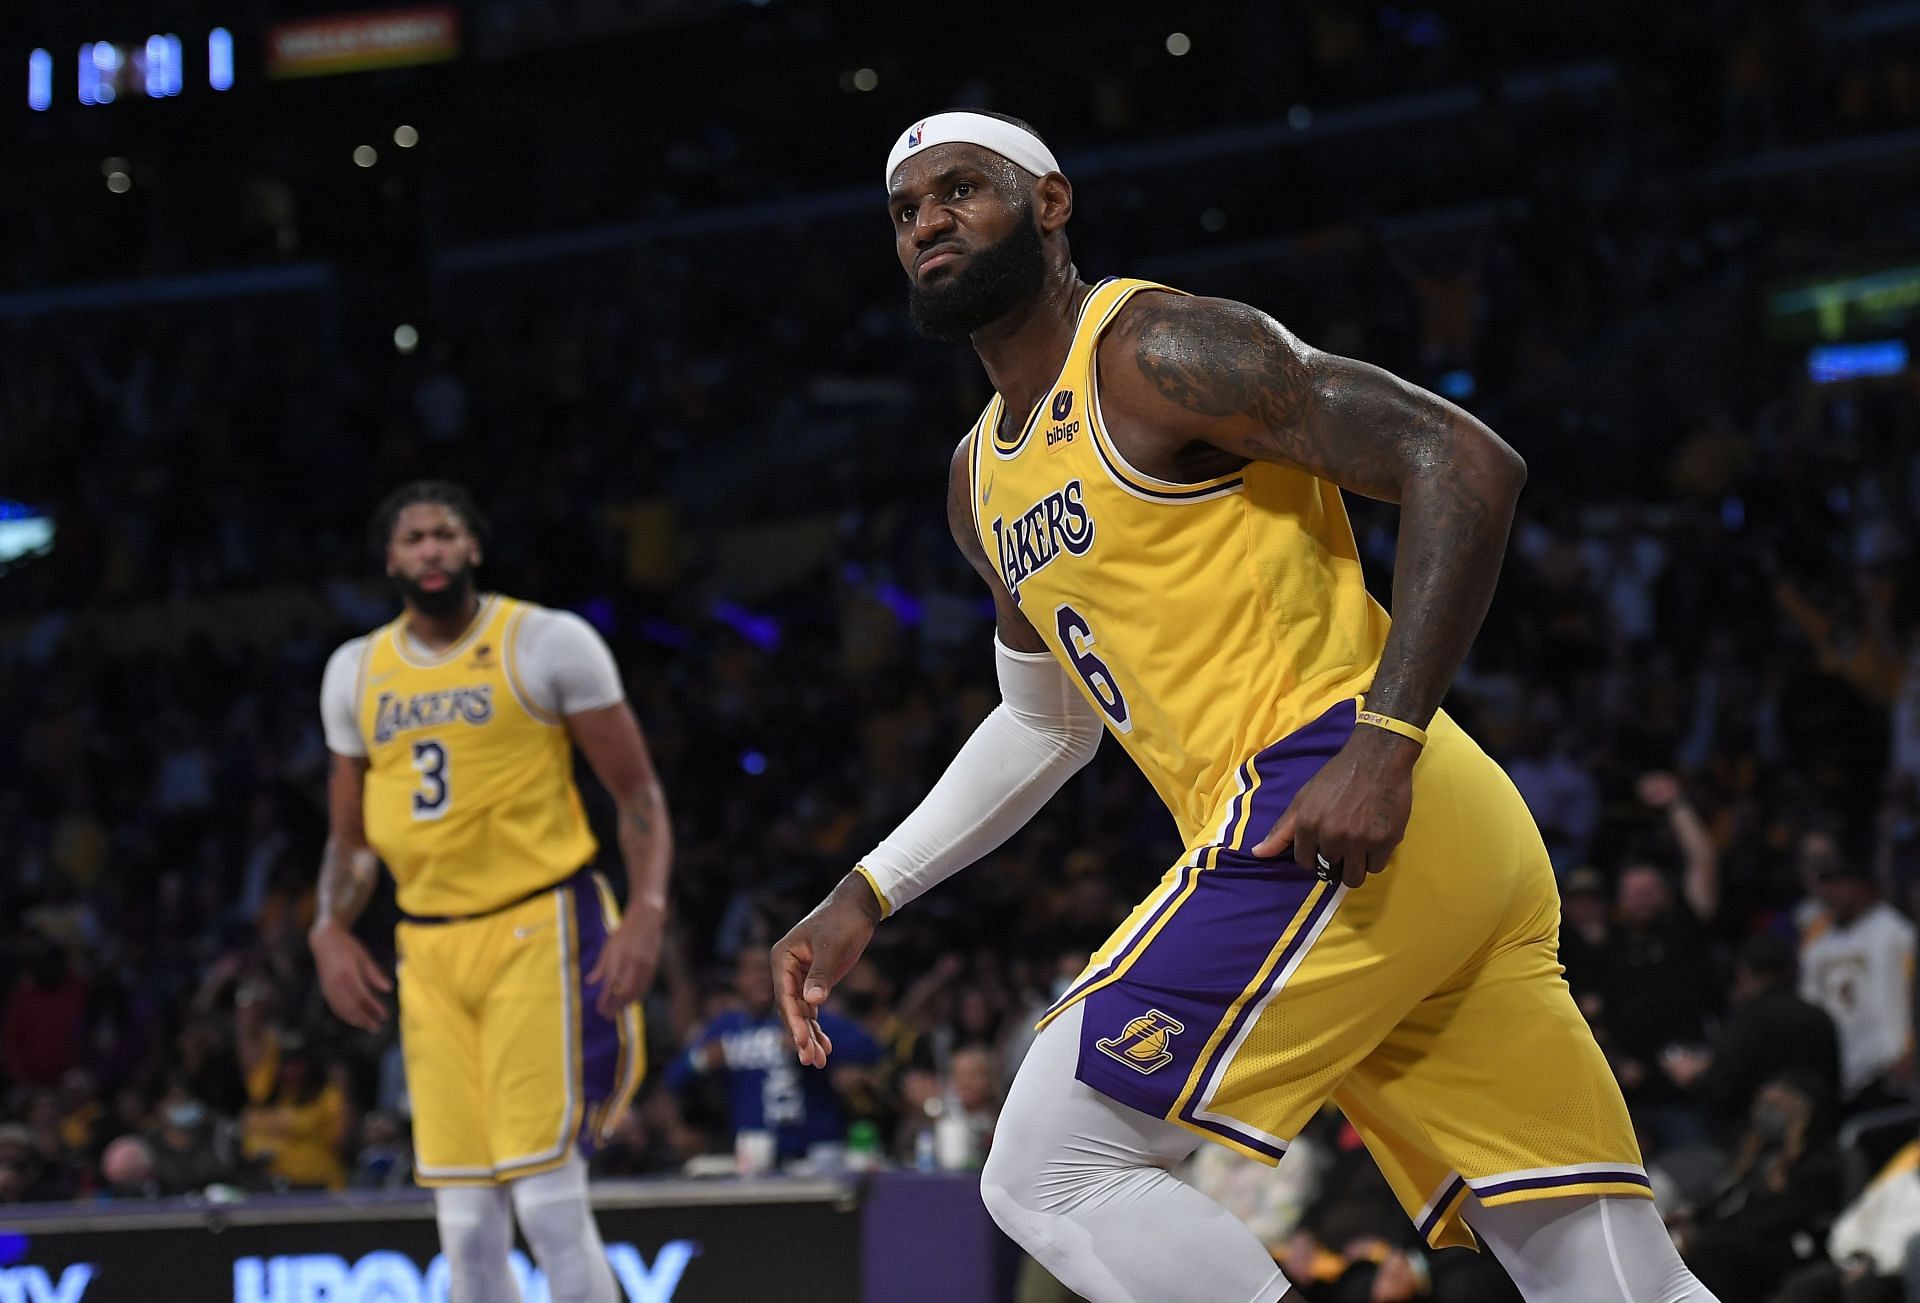 LeBron James of the Los Angeles Lakers reacts after scoring during the second half against the Golden State Warriors on Oct. 19, 2021, in Los Angeles.